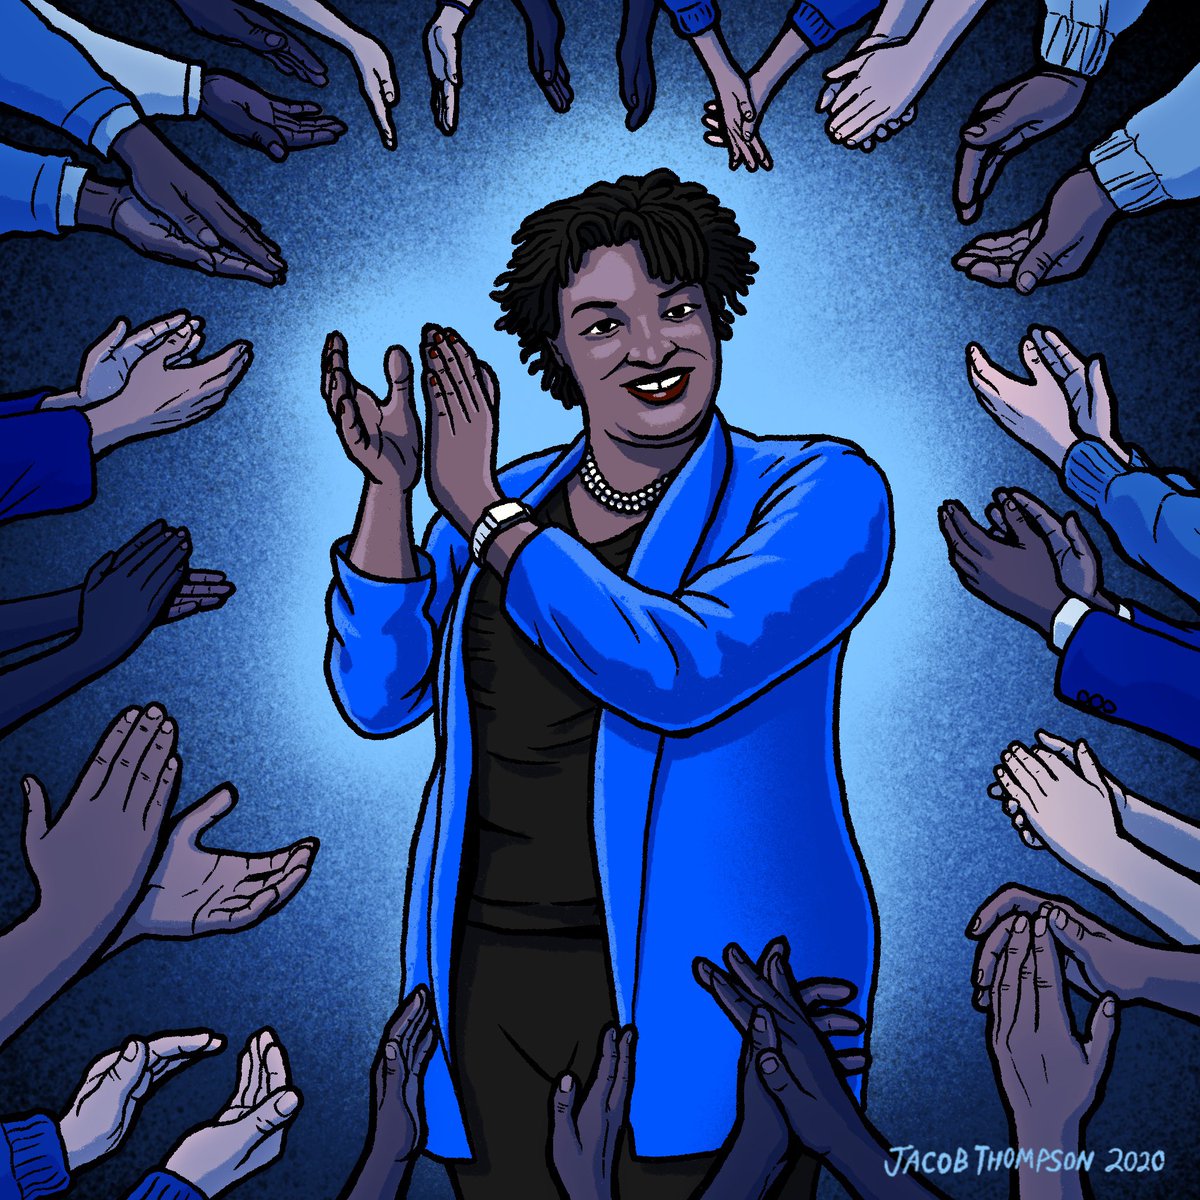 She really deserves a round of applause from everyone.  Thank you for hard work, @staceyabrams.  #Election2020 #staceyabrams #thankyou #GeorgiaBlueWave #illustration #blackillustrators #BidenHarris2020 #DemocracyWins